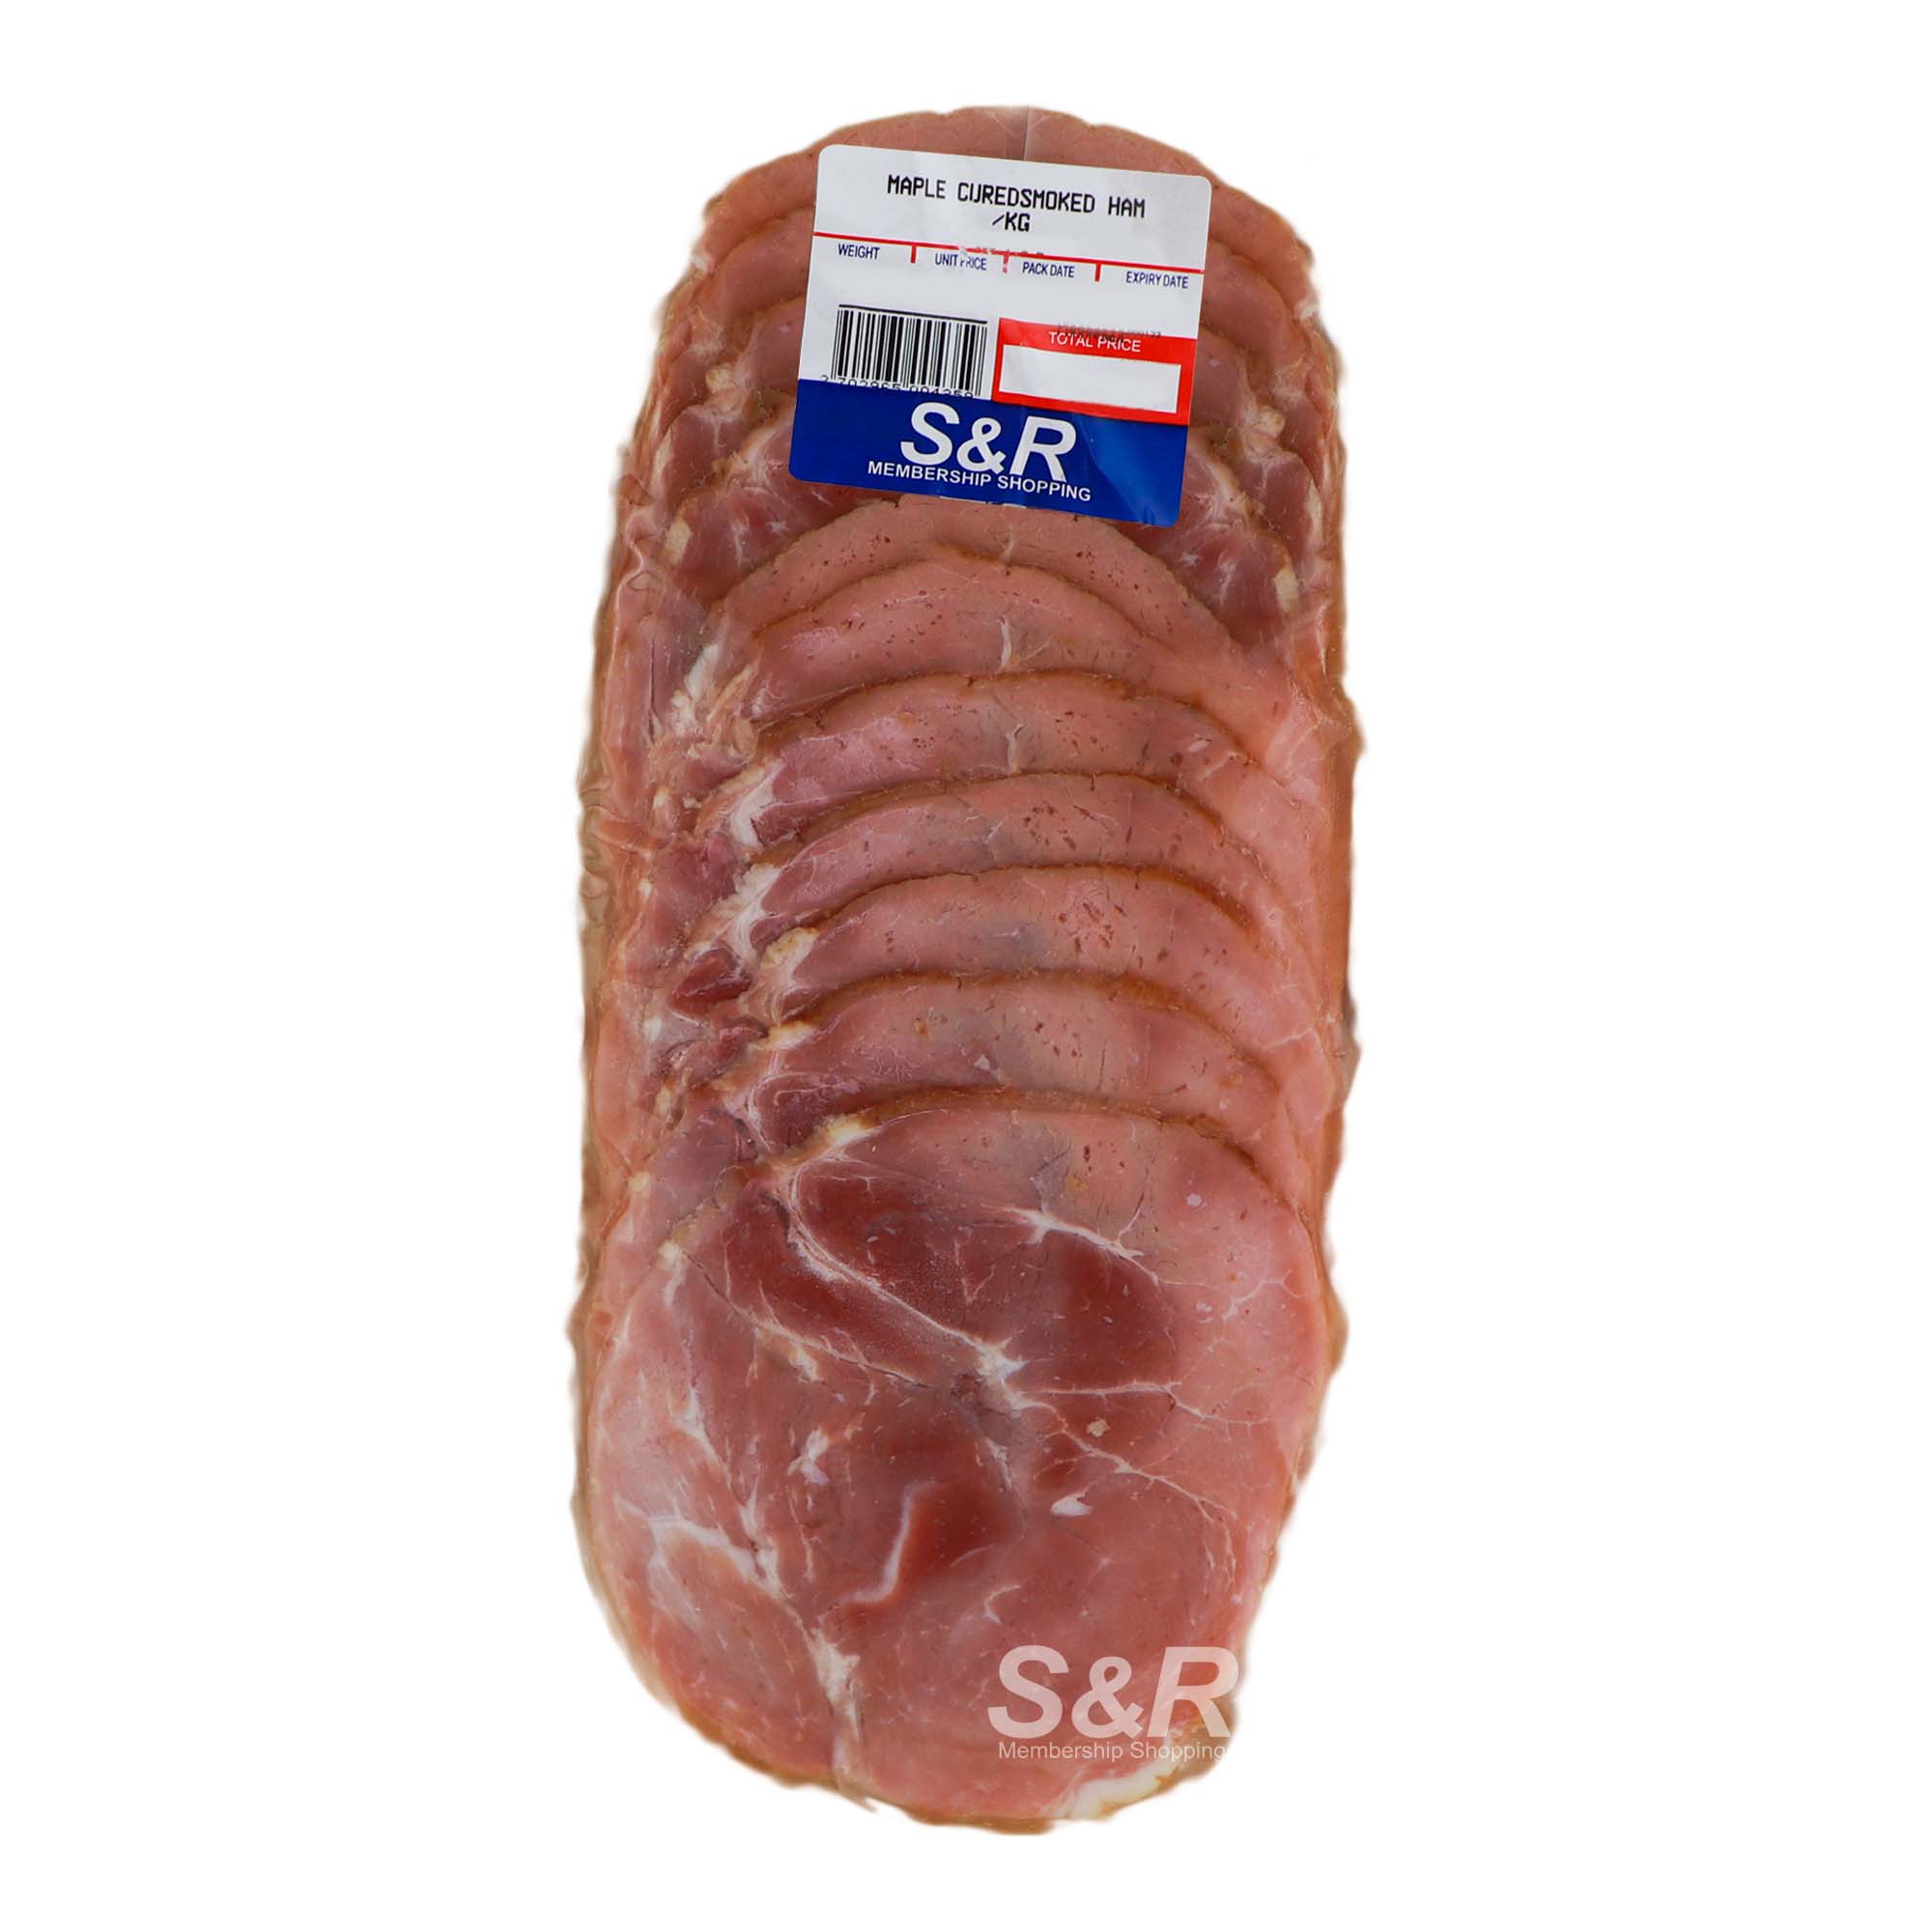 S&R Maple Cured Smoked Ham approx. 450g